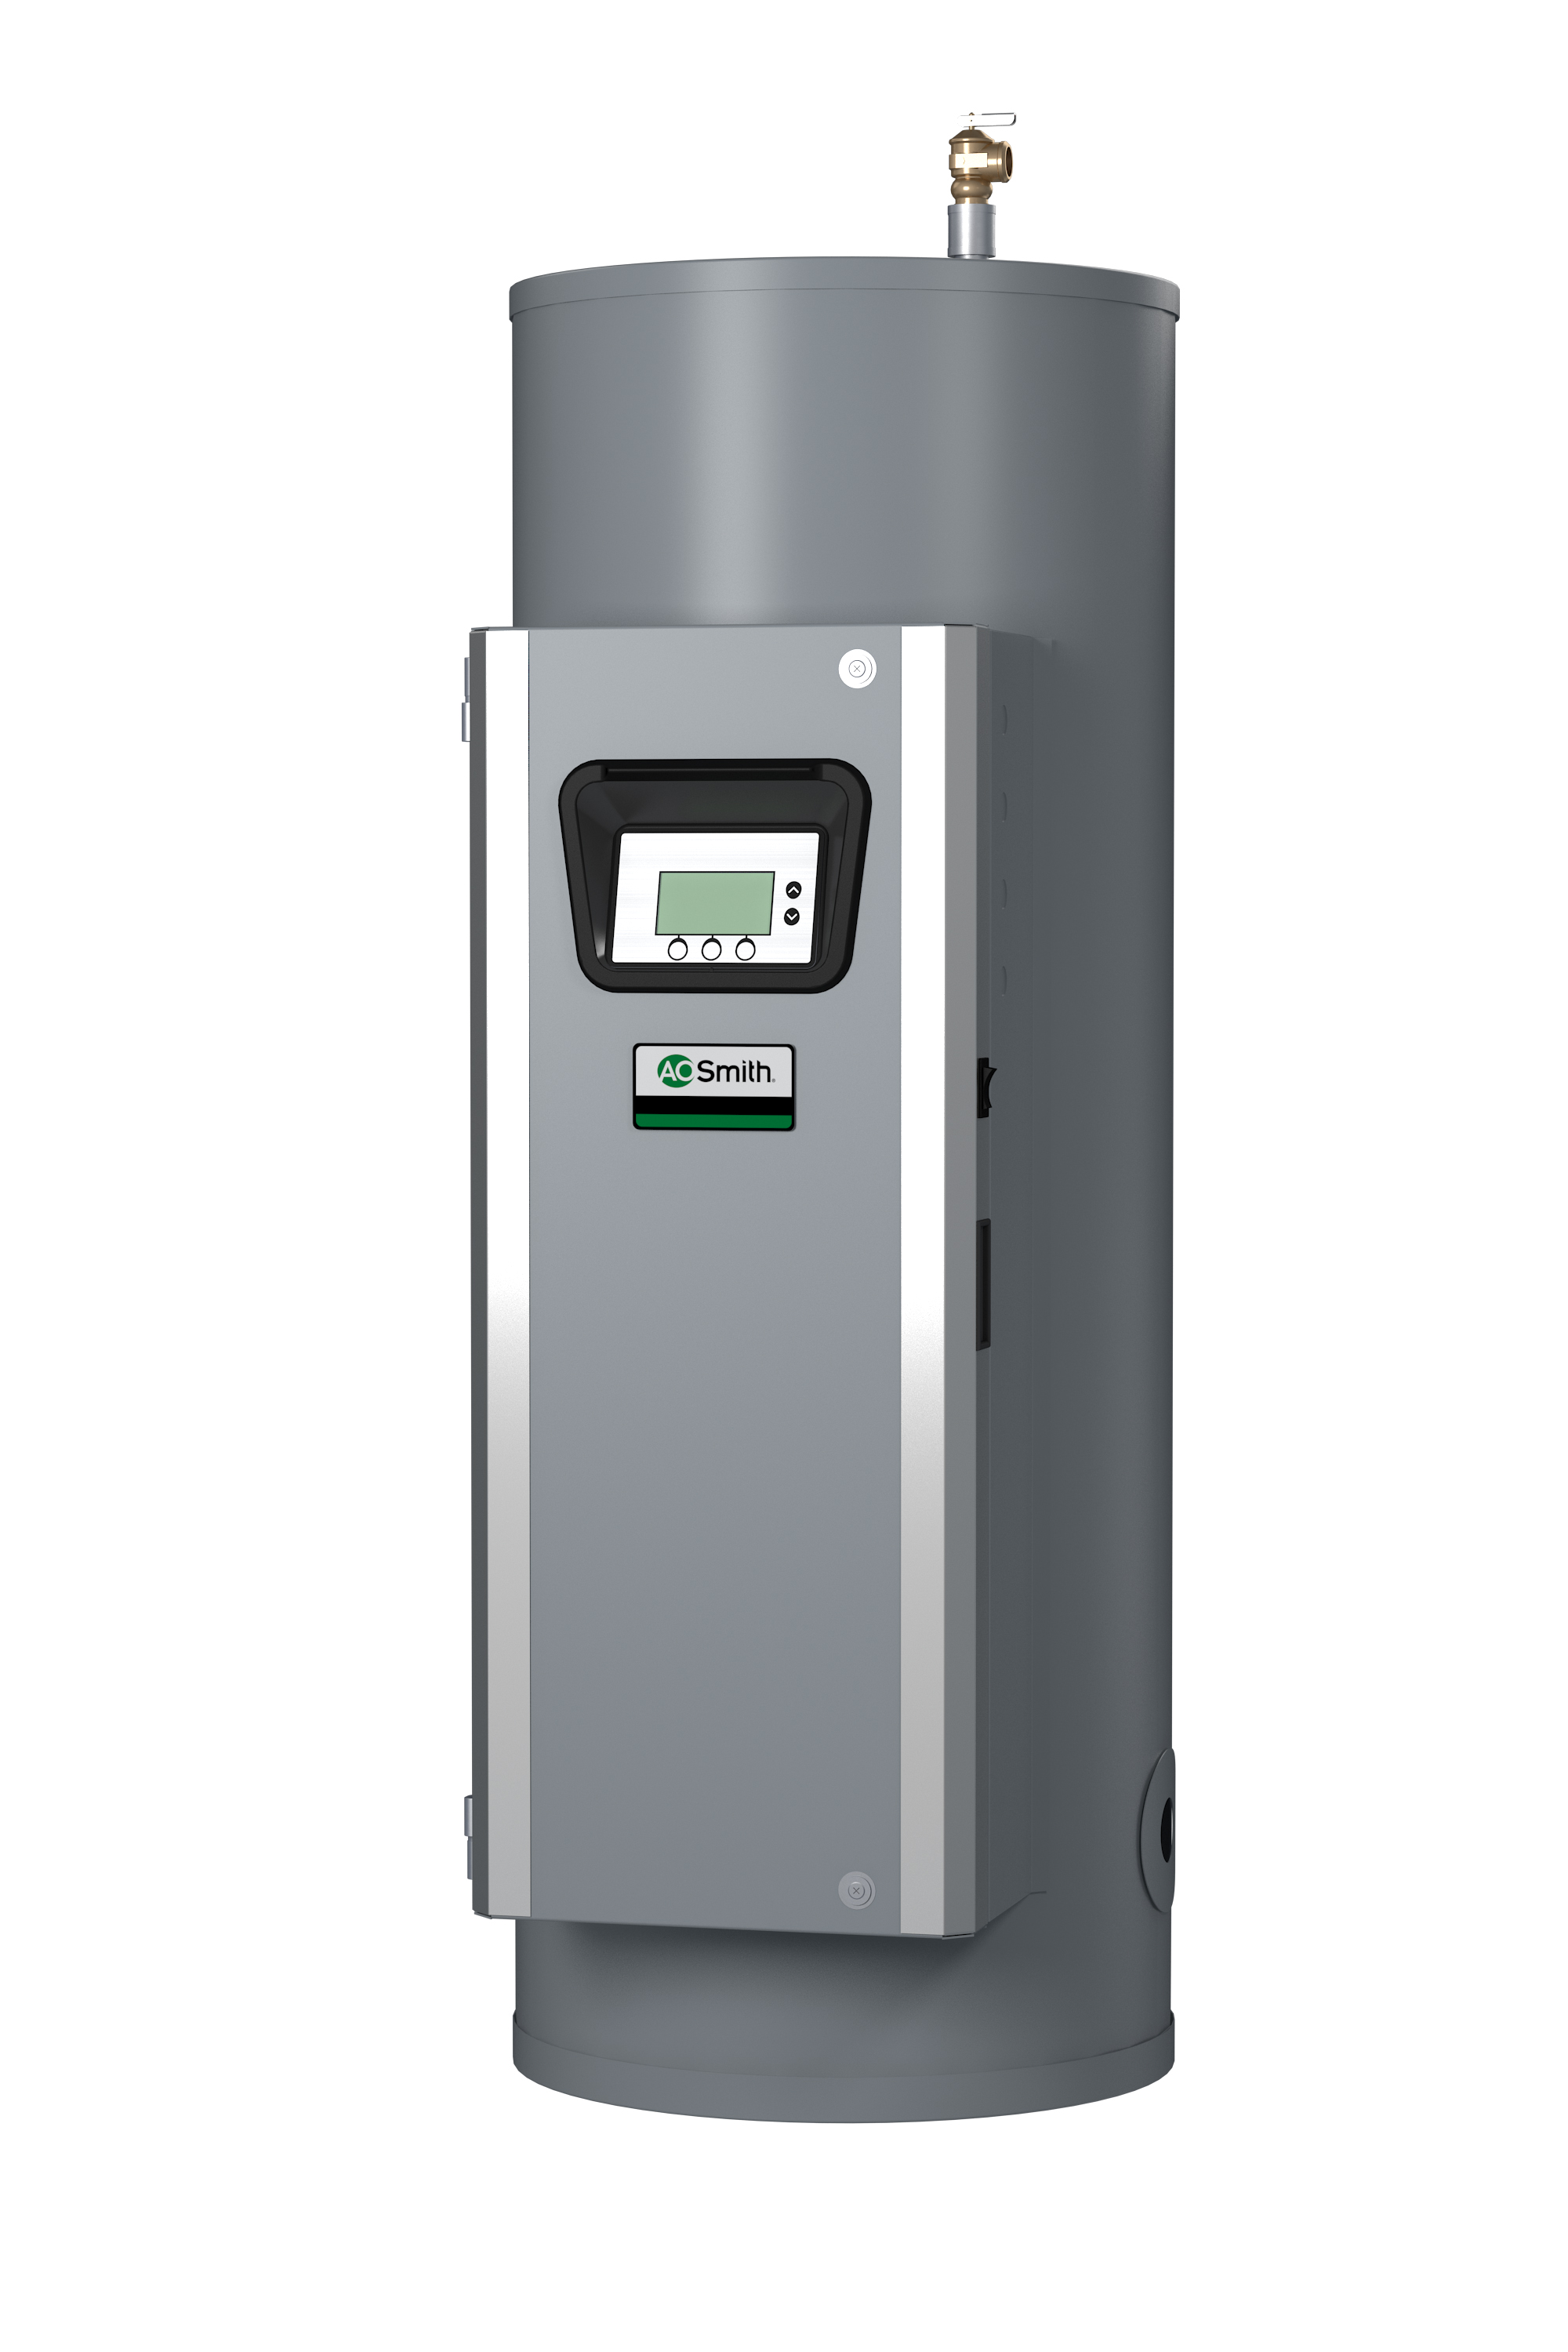 AO SMITH DSE-100A-36, 100 GALLONS, 36KW, 480 VOLT, 75 AMPS, 1 PHASE, 2 ELEMENTS, ASME CUSTOM Xi SERIES HEAVY DUTY COMMERCIAL ELECTRIC WATER HEATER